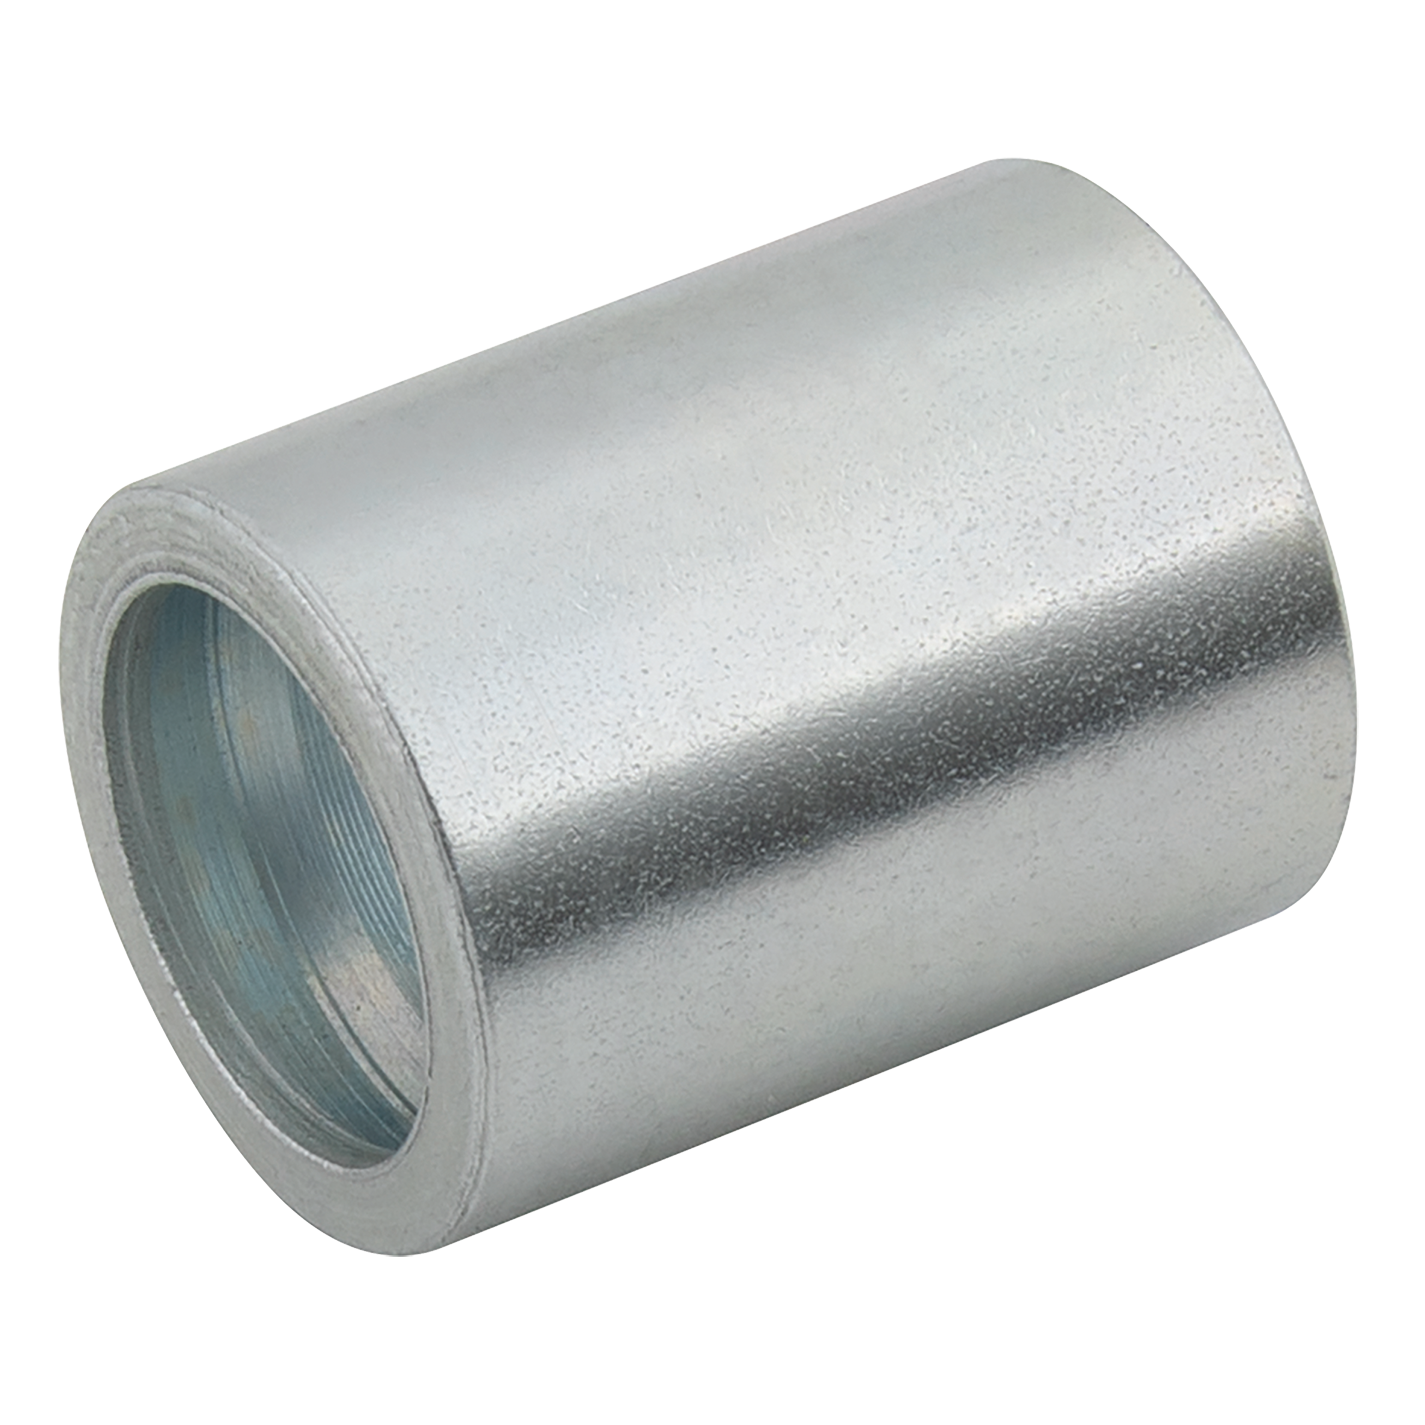 3/8"Hose Insert Ferrule Smooth and Convoluted Bore